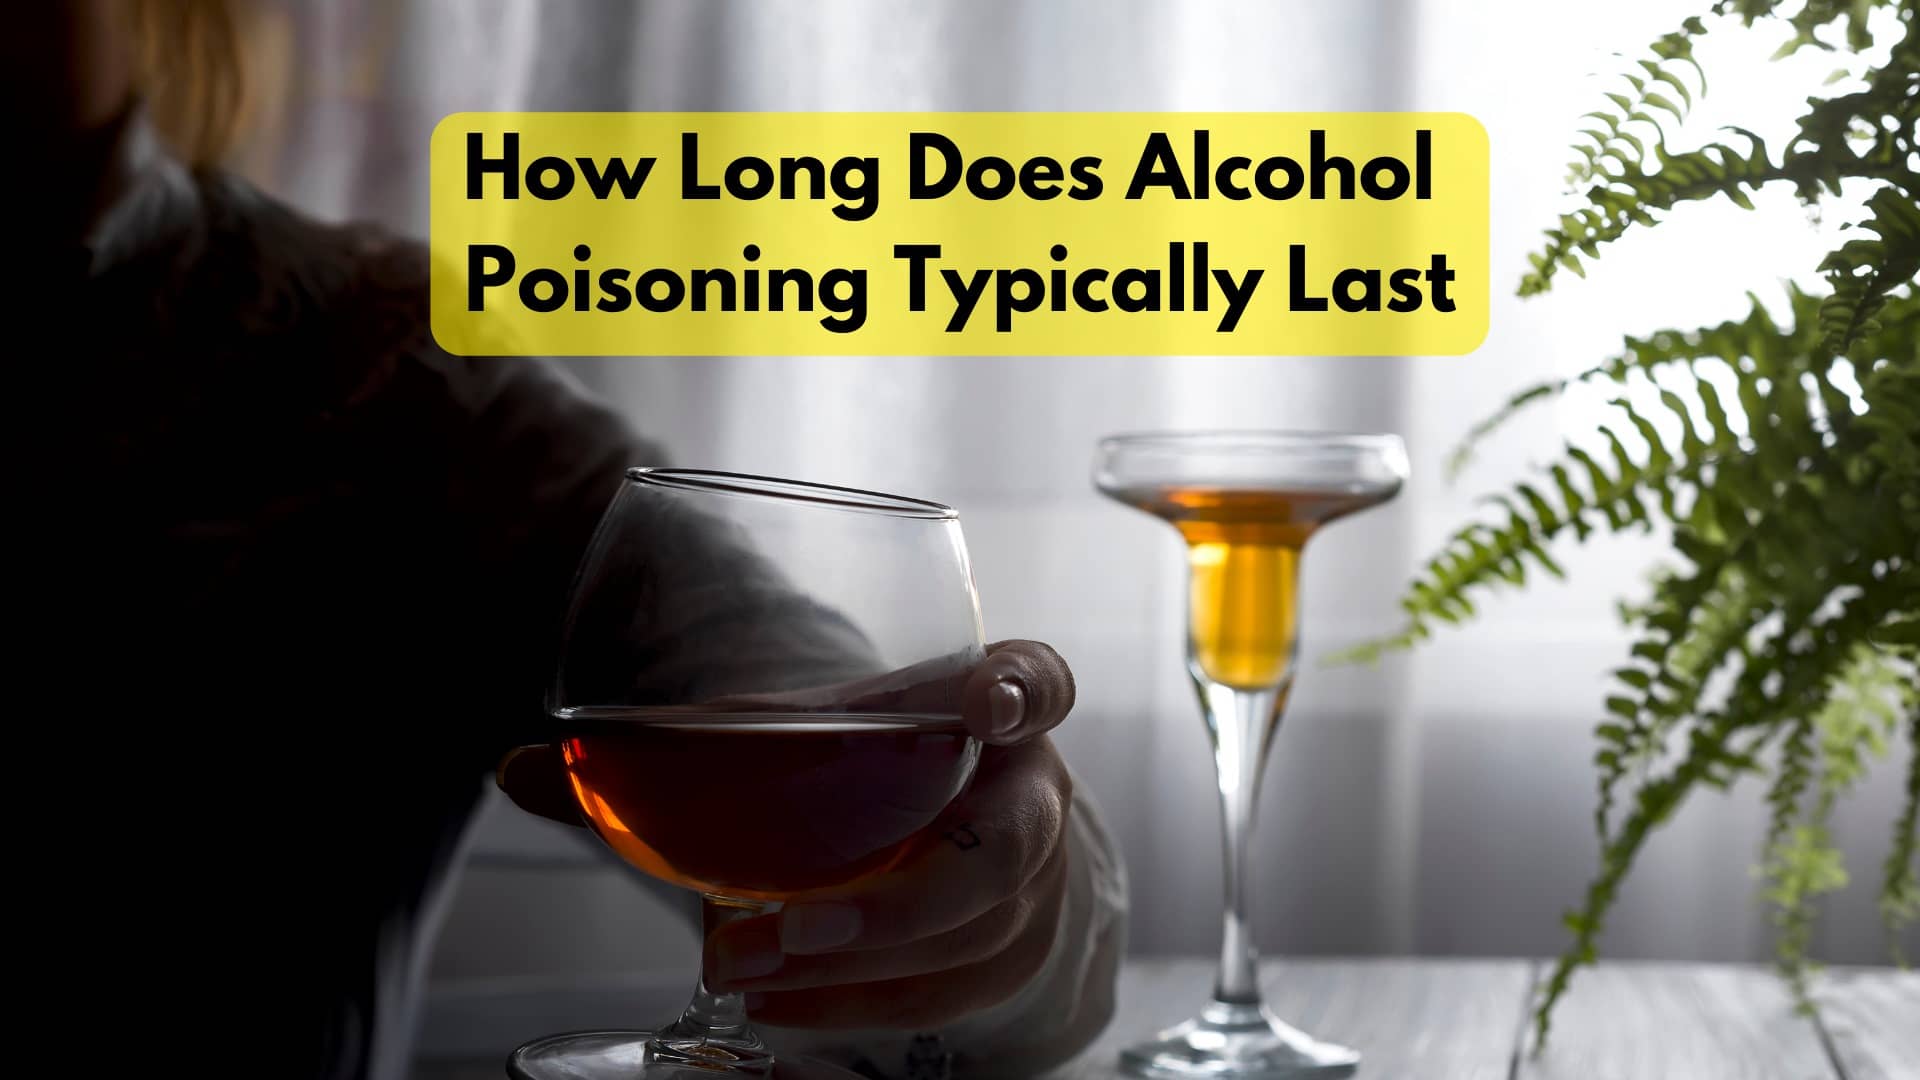 How Long Does Alcohol Poisoning Typically Last?